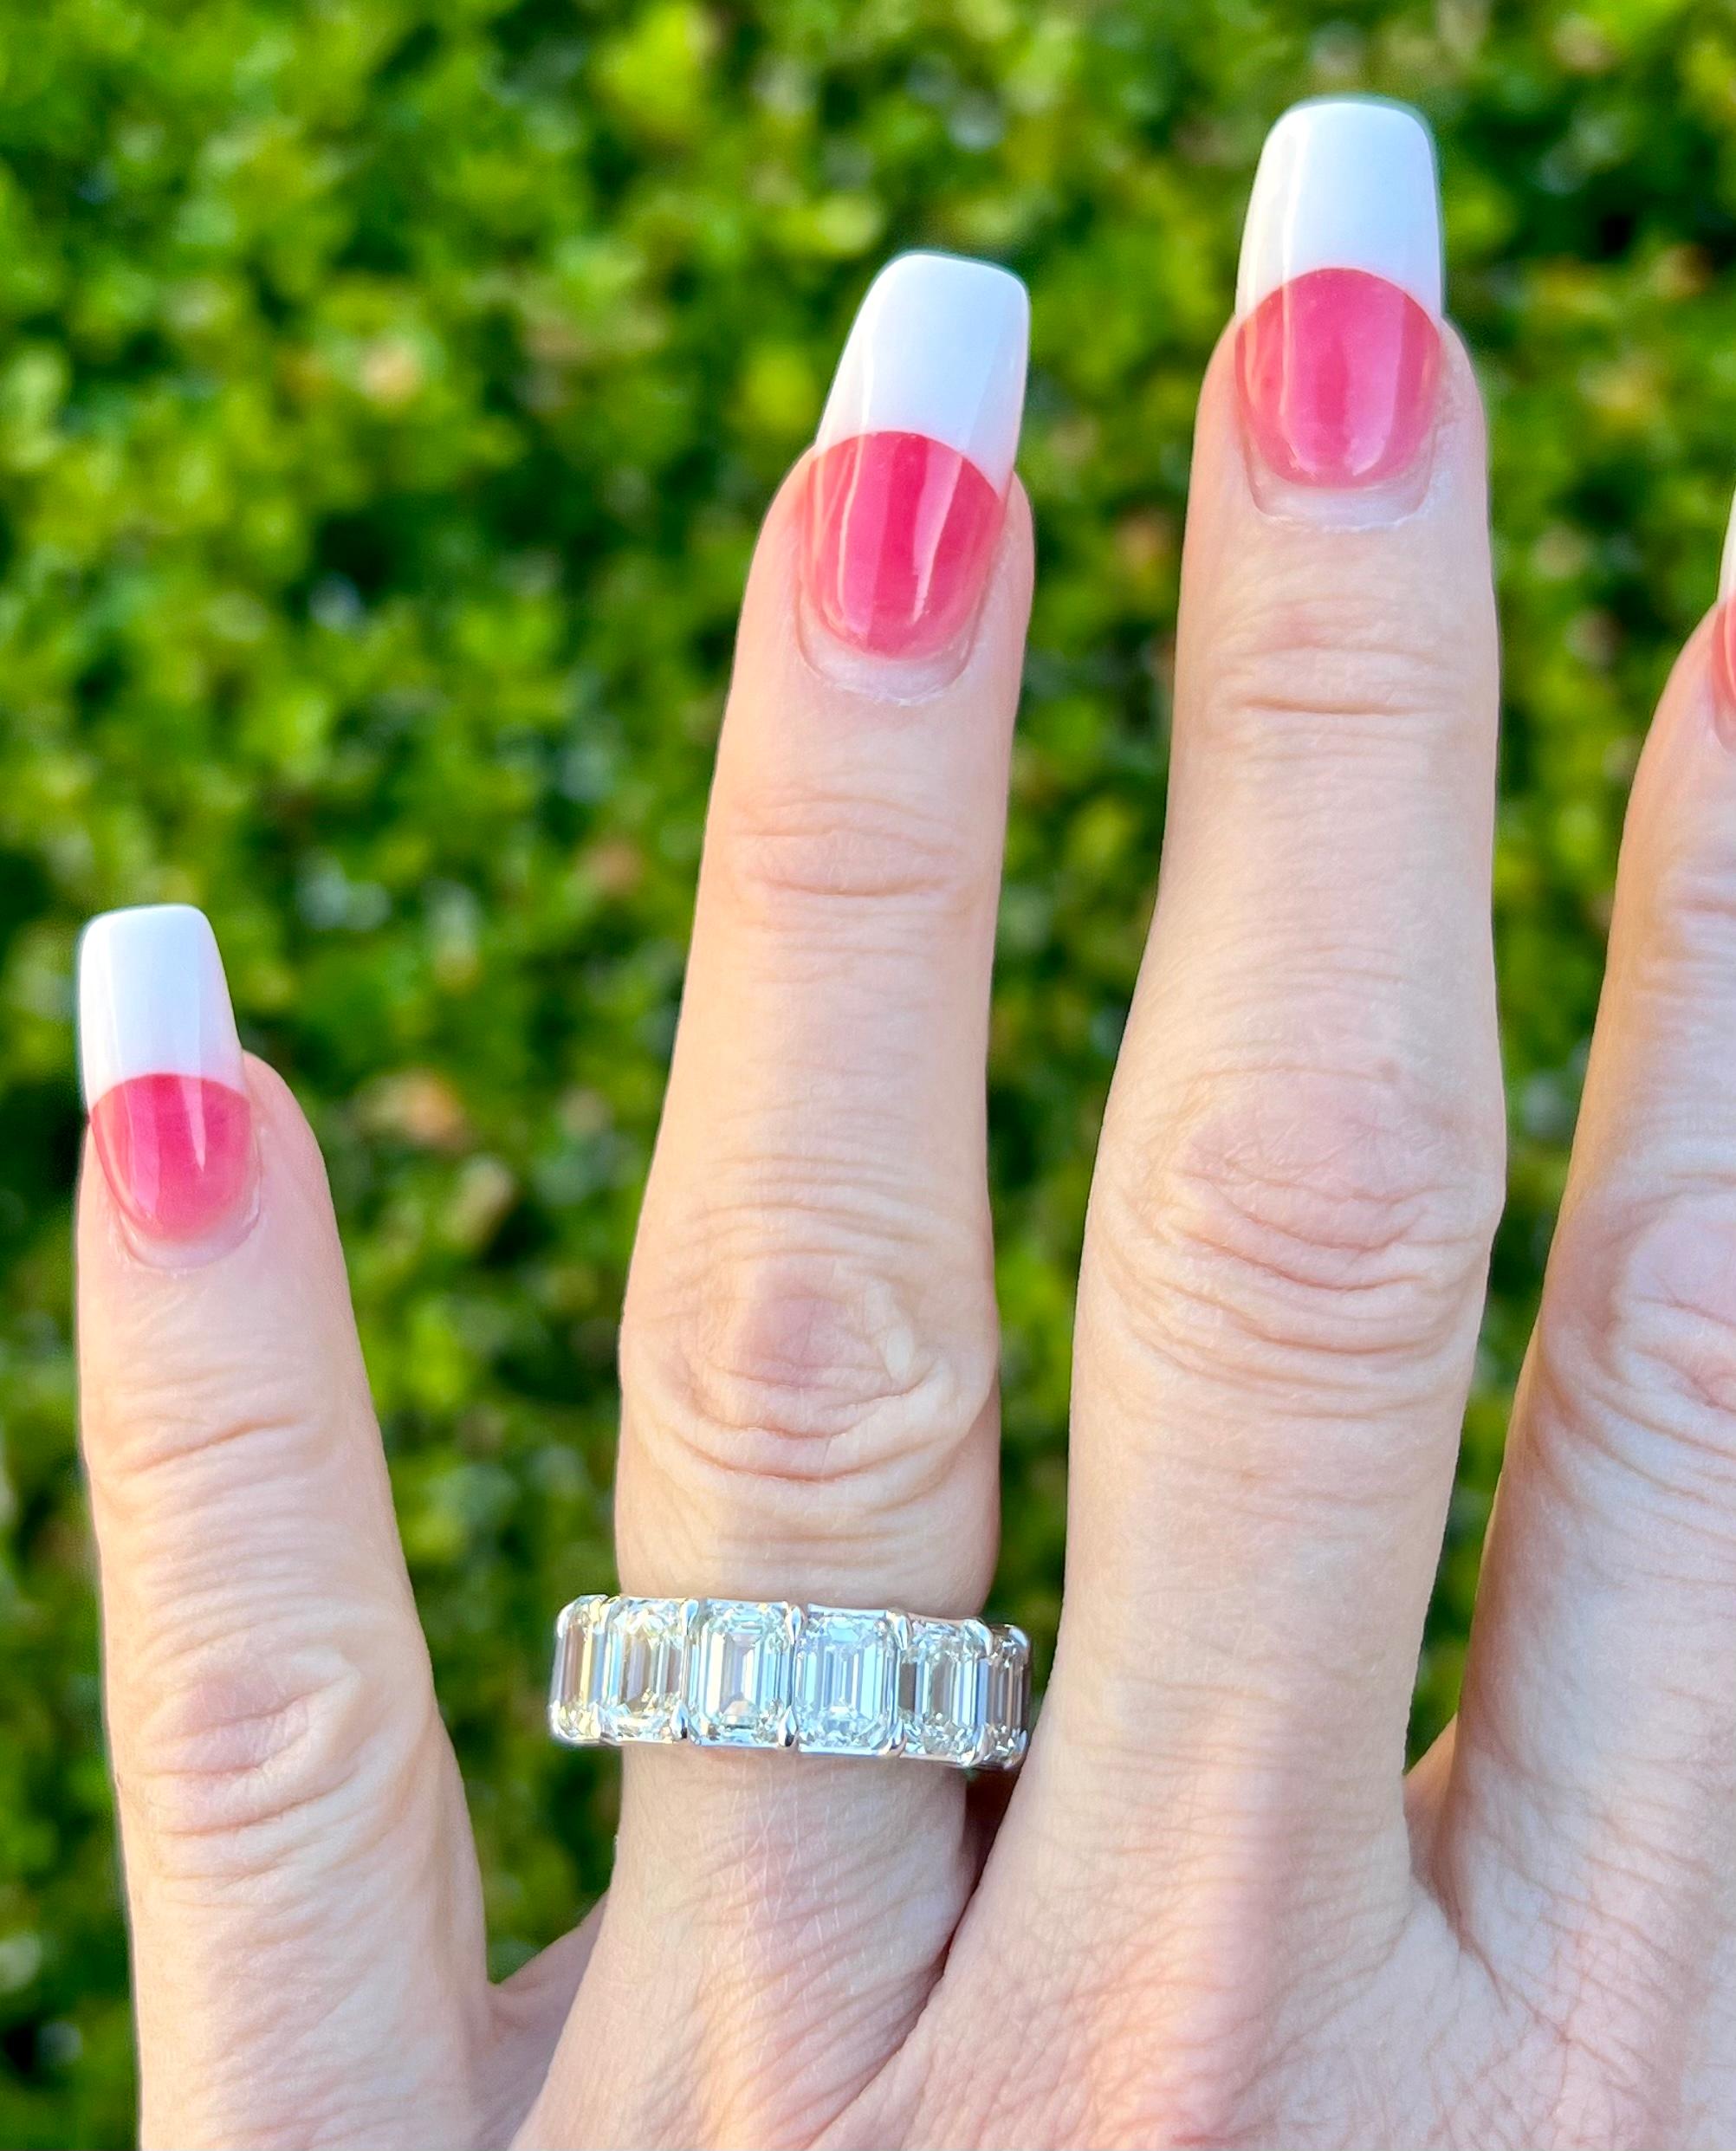 Very elegant ladies 18 karat white gold custom made estate eternity band adorned with 14 Emerald cut solitaire diamonds all open shared prong set to better showcase their beauty.  Eternity bands are a symbol of eternal love and a promise of lifelong